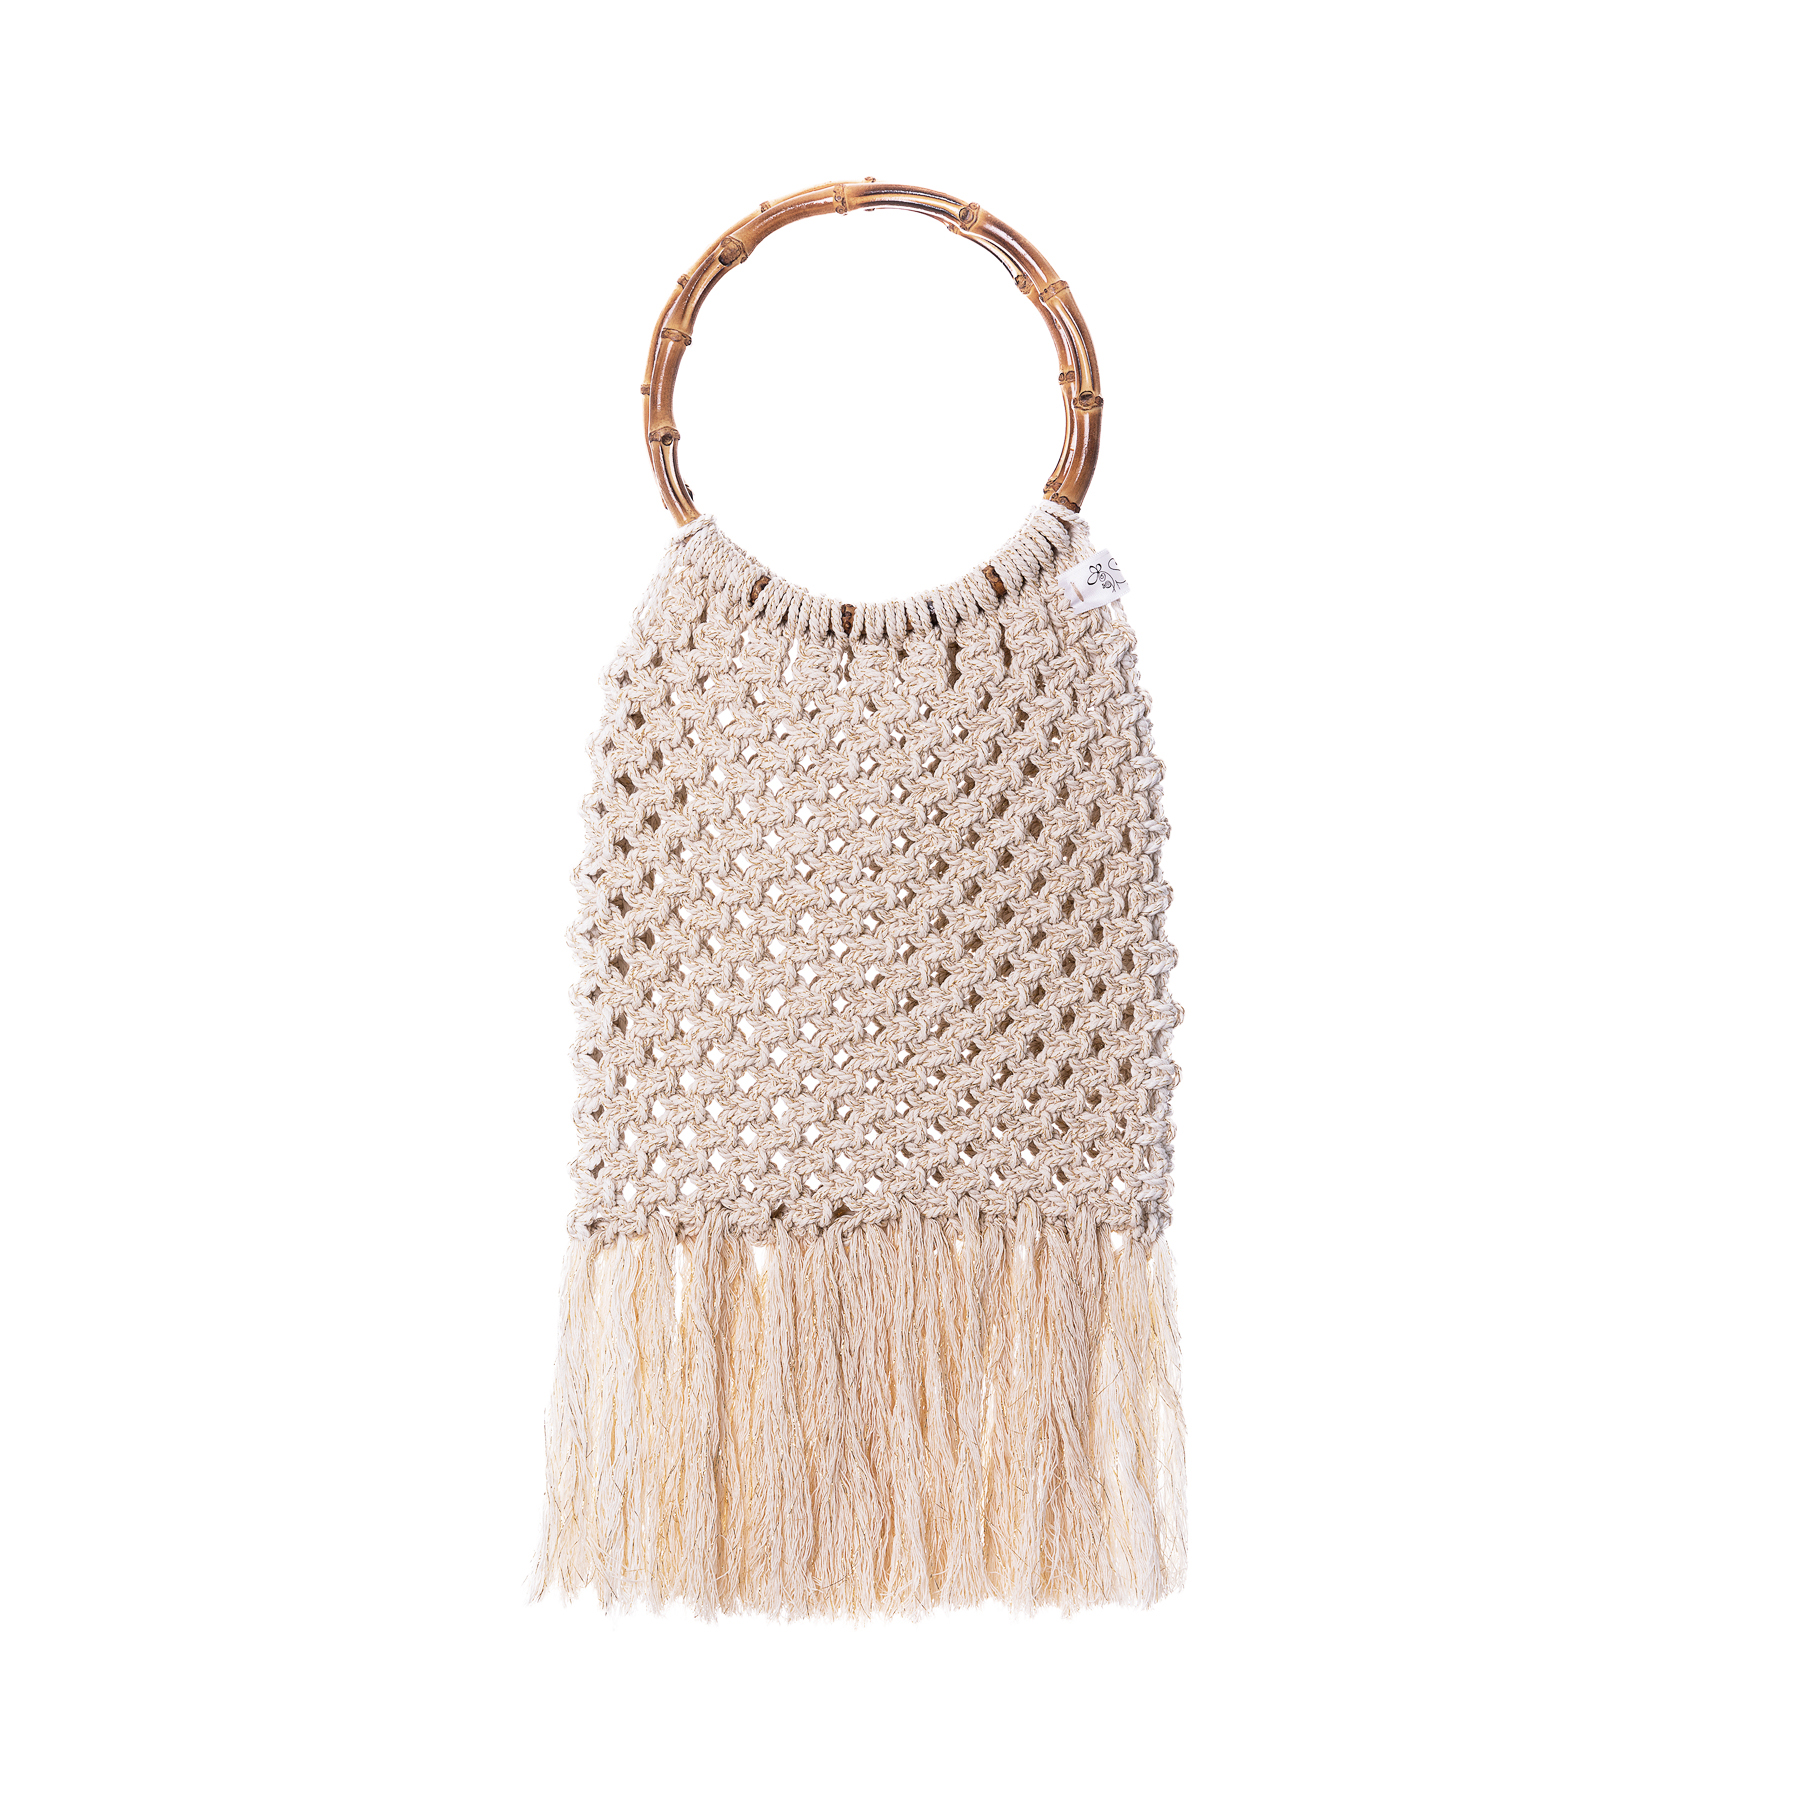 handmade macrame bag in natural white with metallic, with wooden circle handles